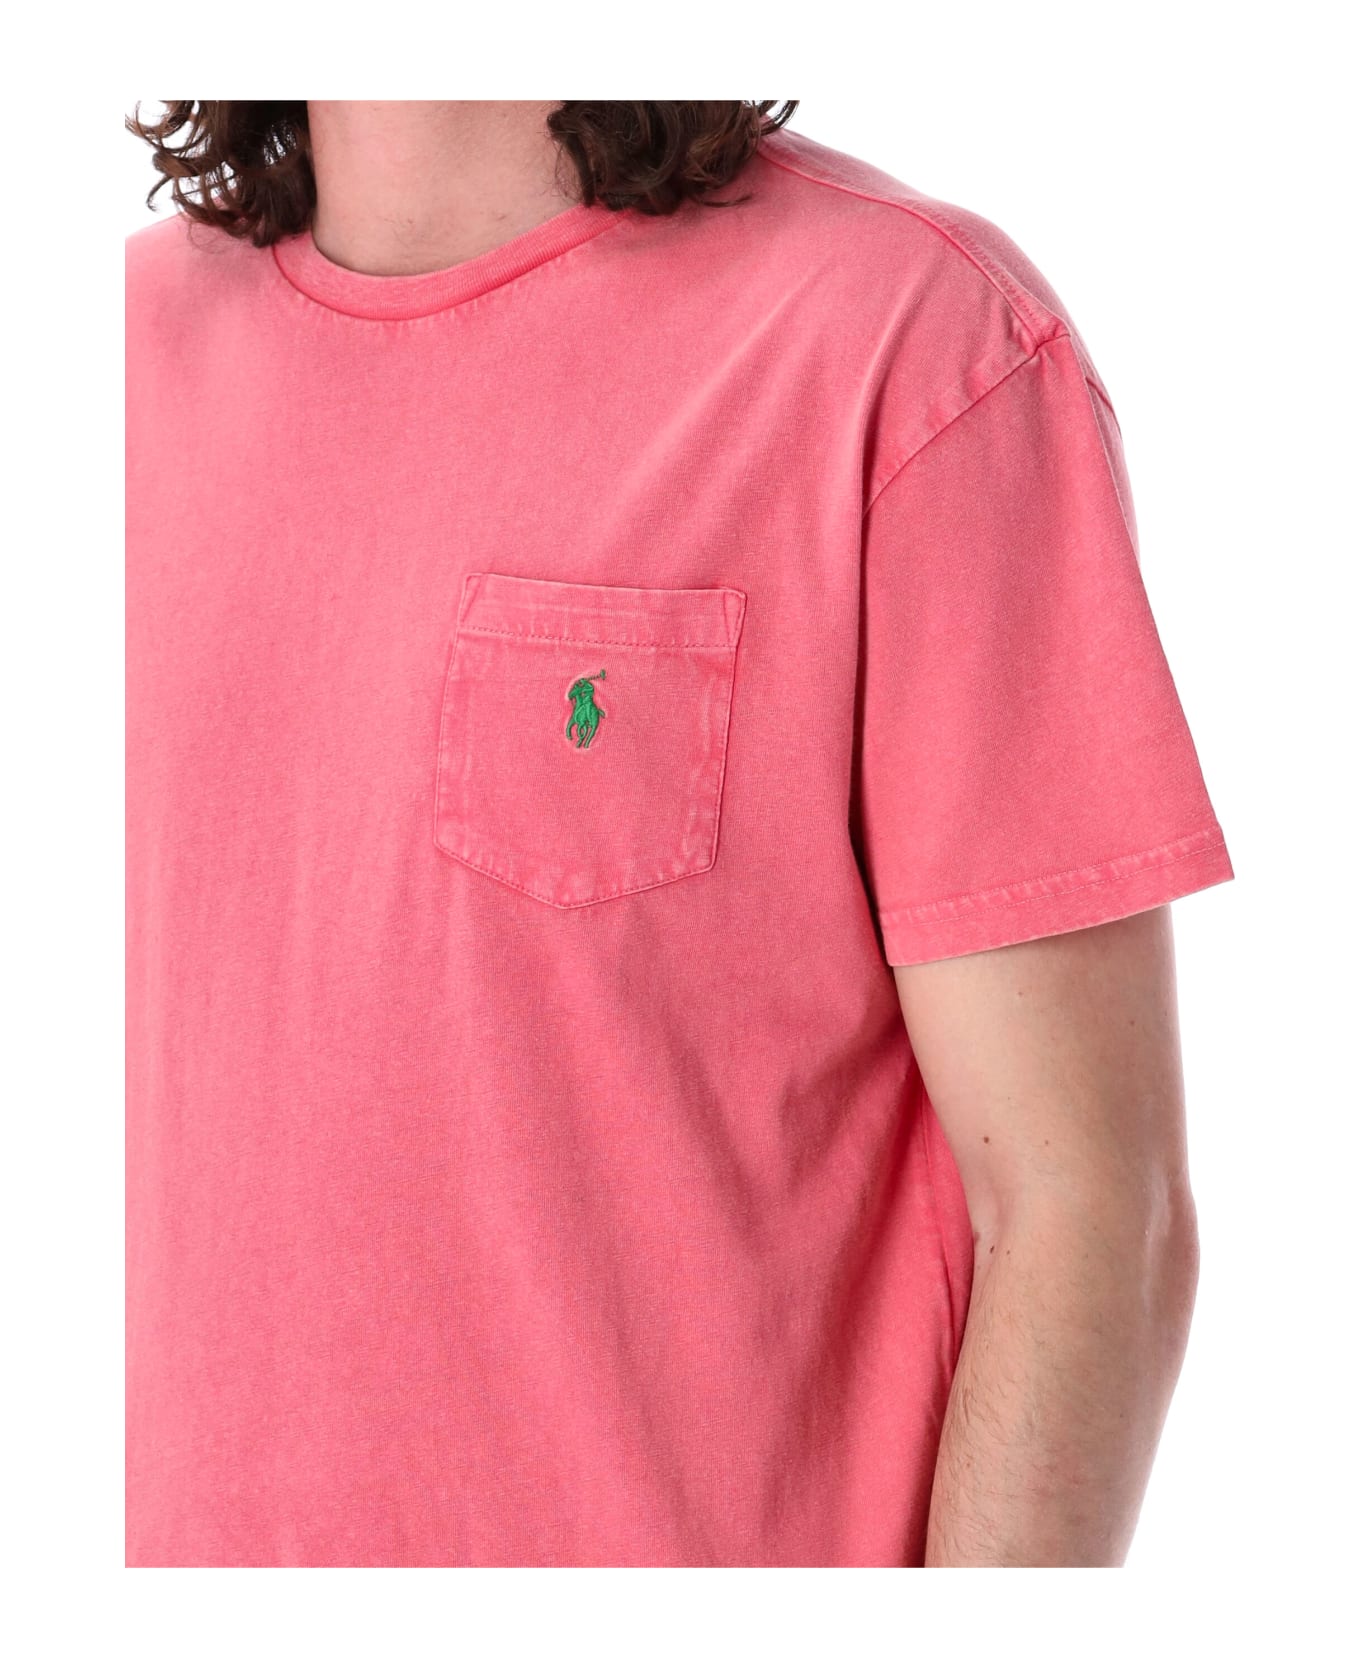 Polo Ralph Lauren Washed Pocket Tee - RED